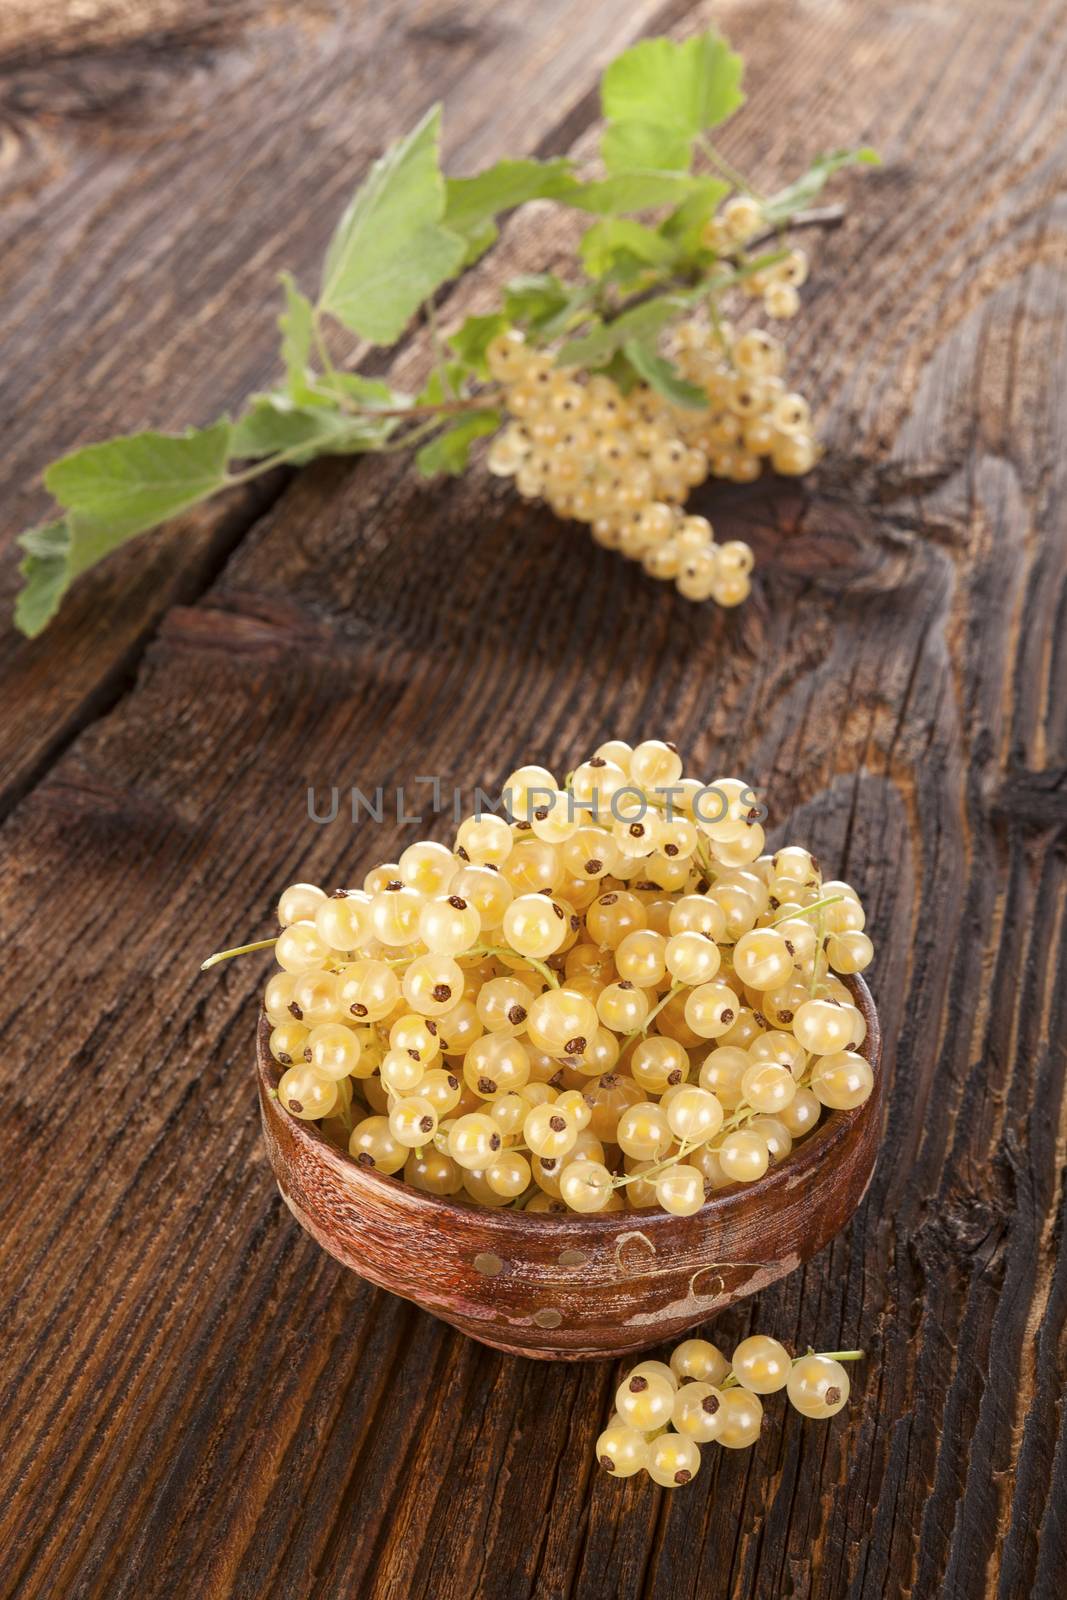 White currant. by eskymaks